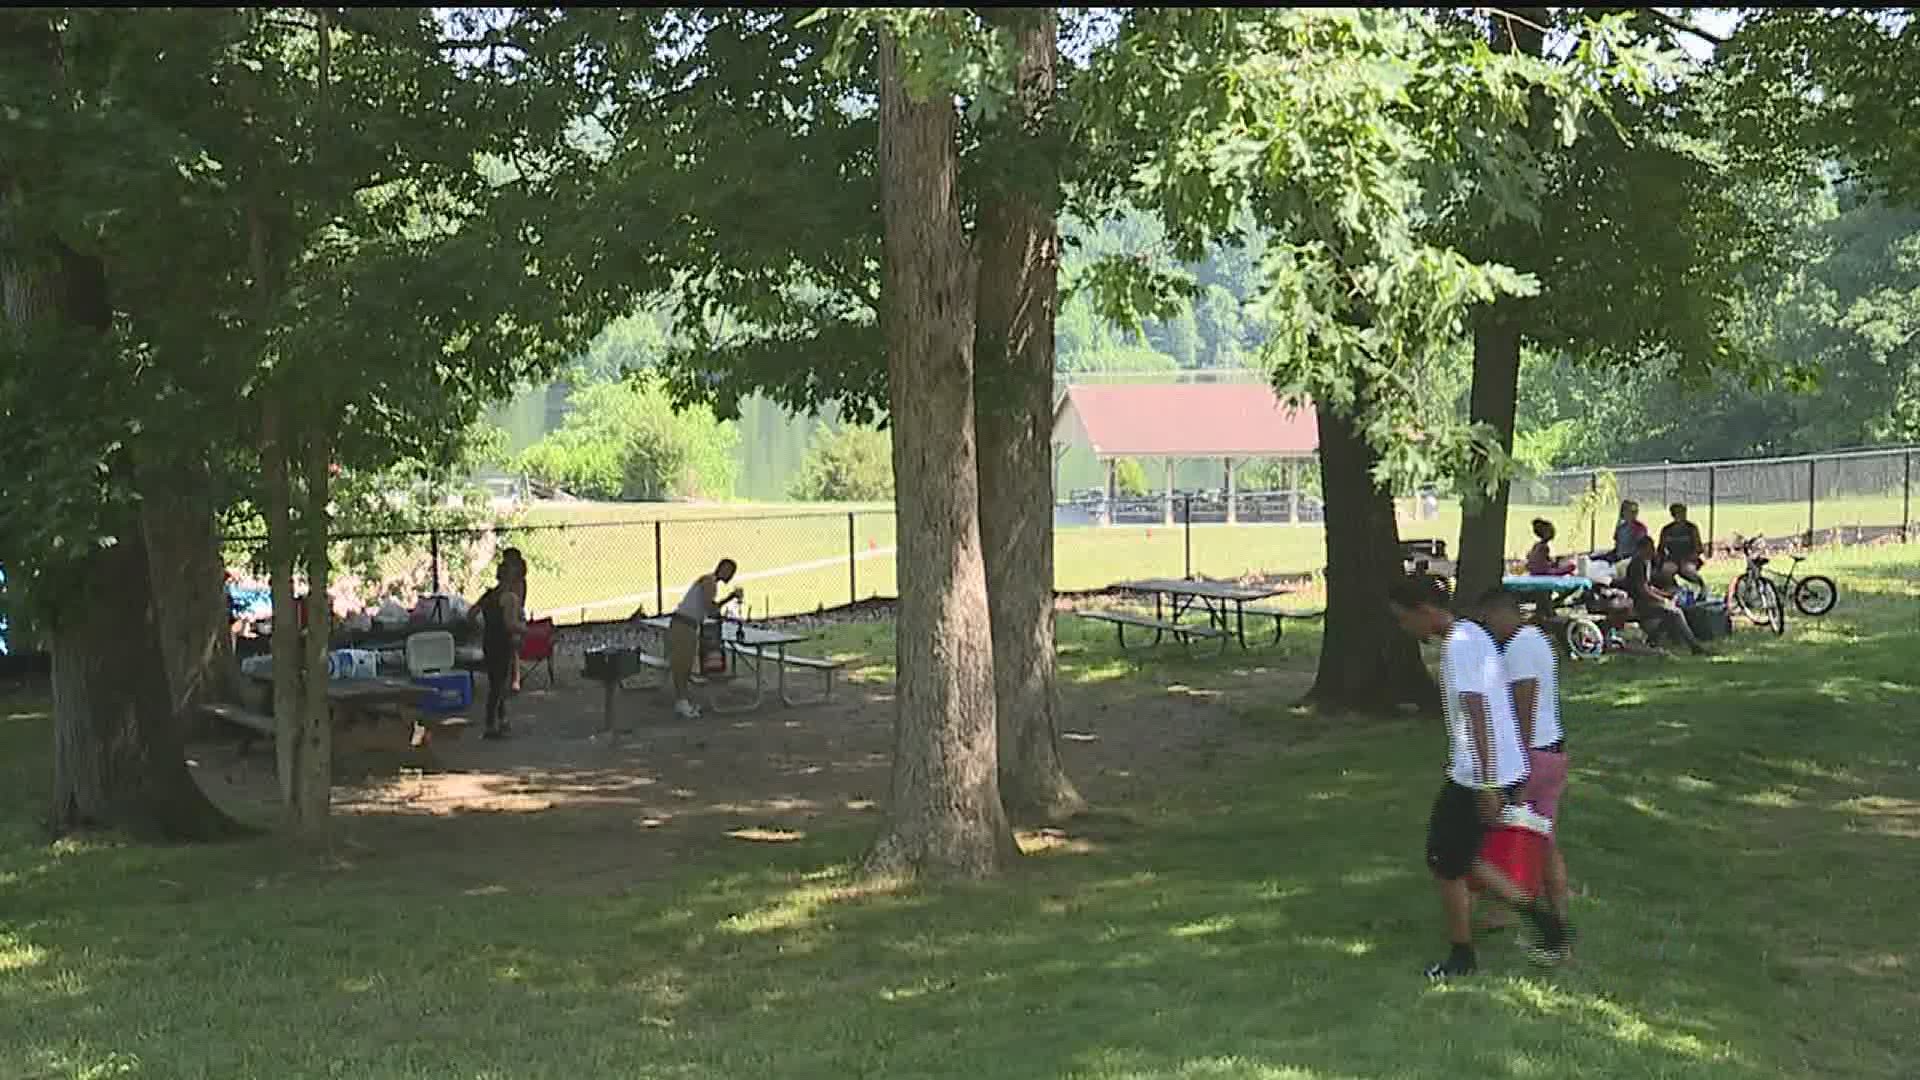 Pennsylvania State Park officials grappled over how to ensure visitors would comply with social distancing over the Fourth of July weekend.